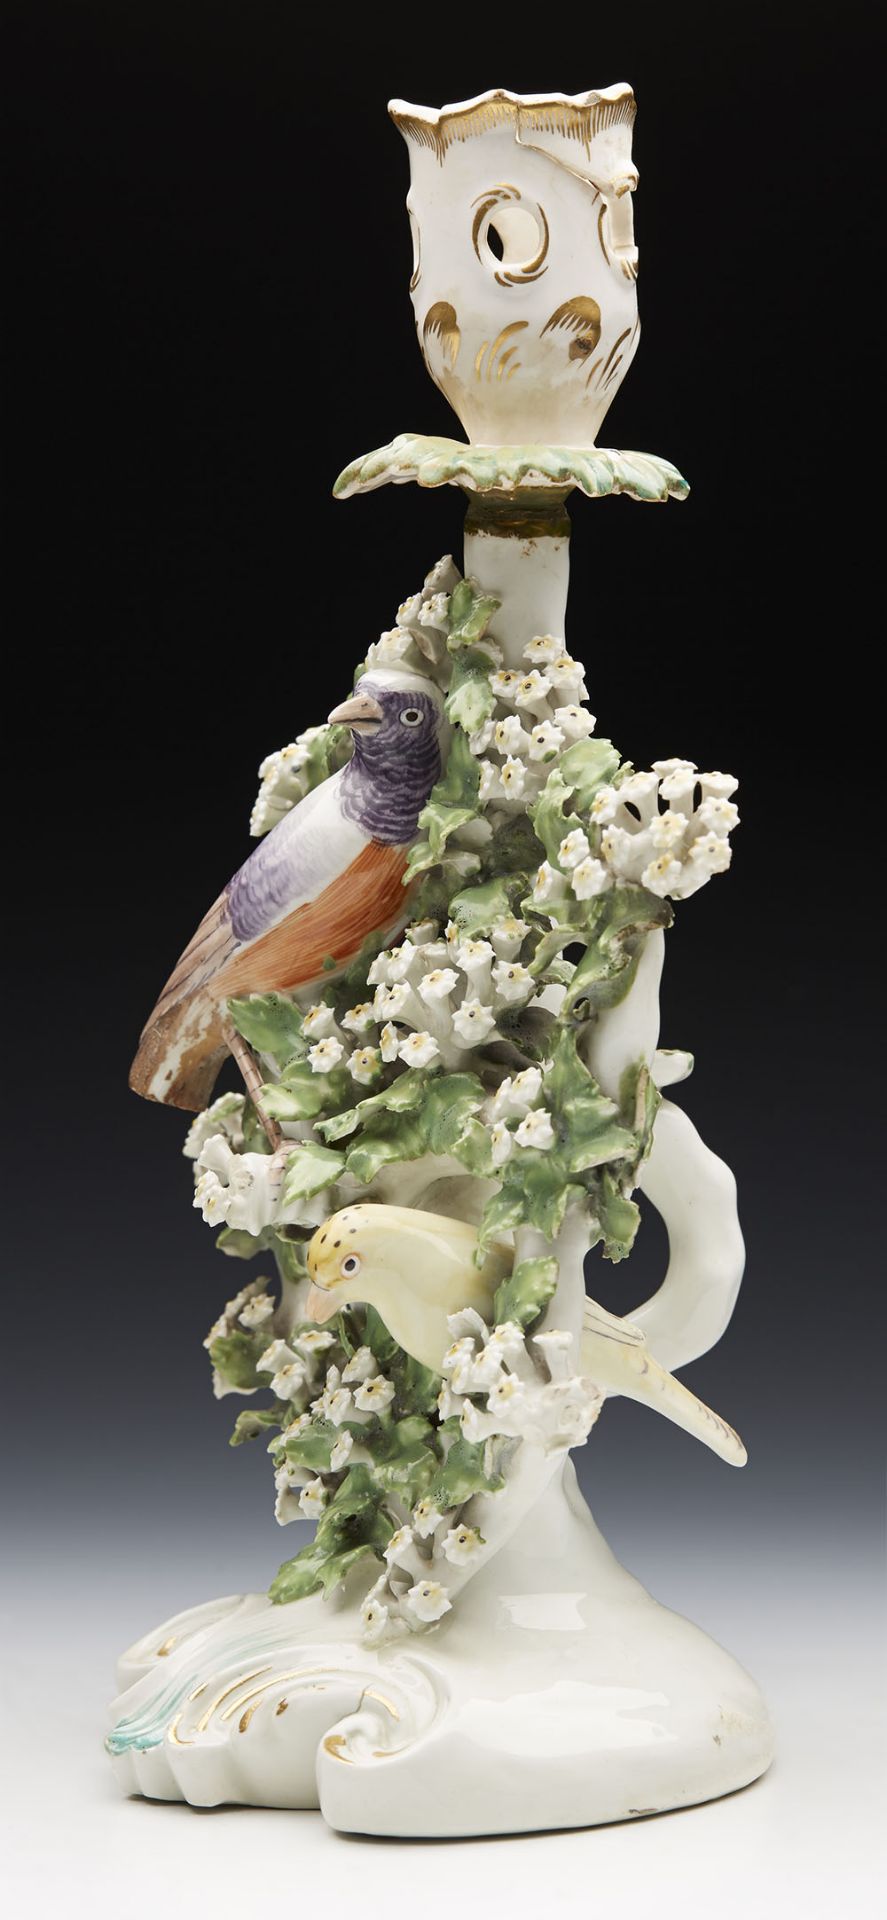 ANTIQUE DERBY PORCELAIN FLORAL CHAMBERSTICK WITH BIRDS c.1765 - Image 3 of 10